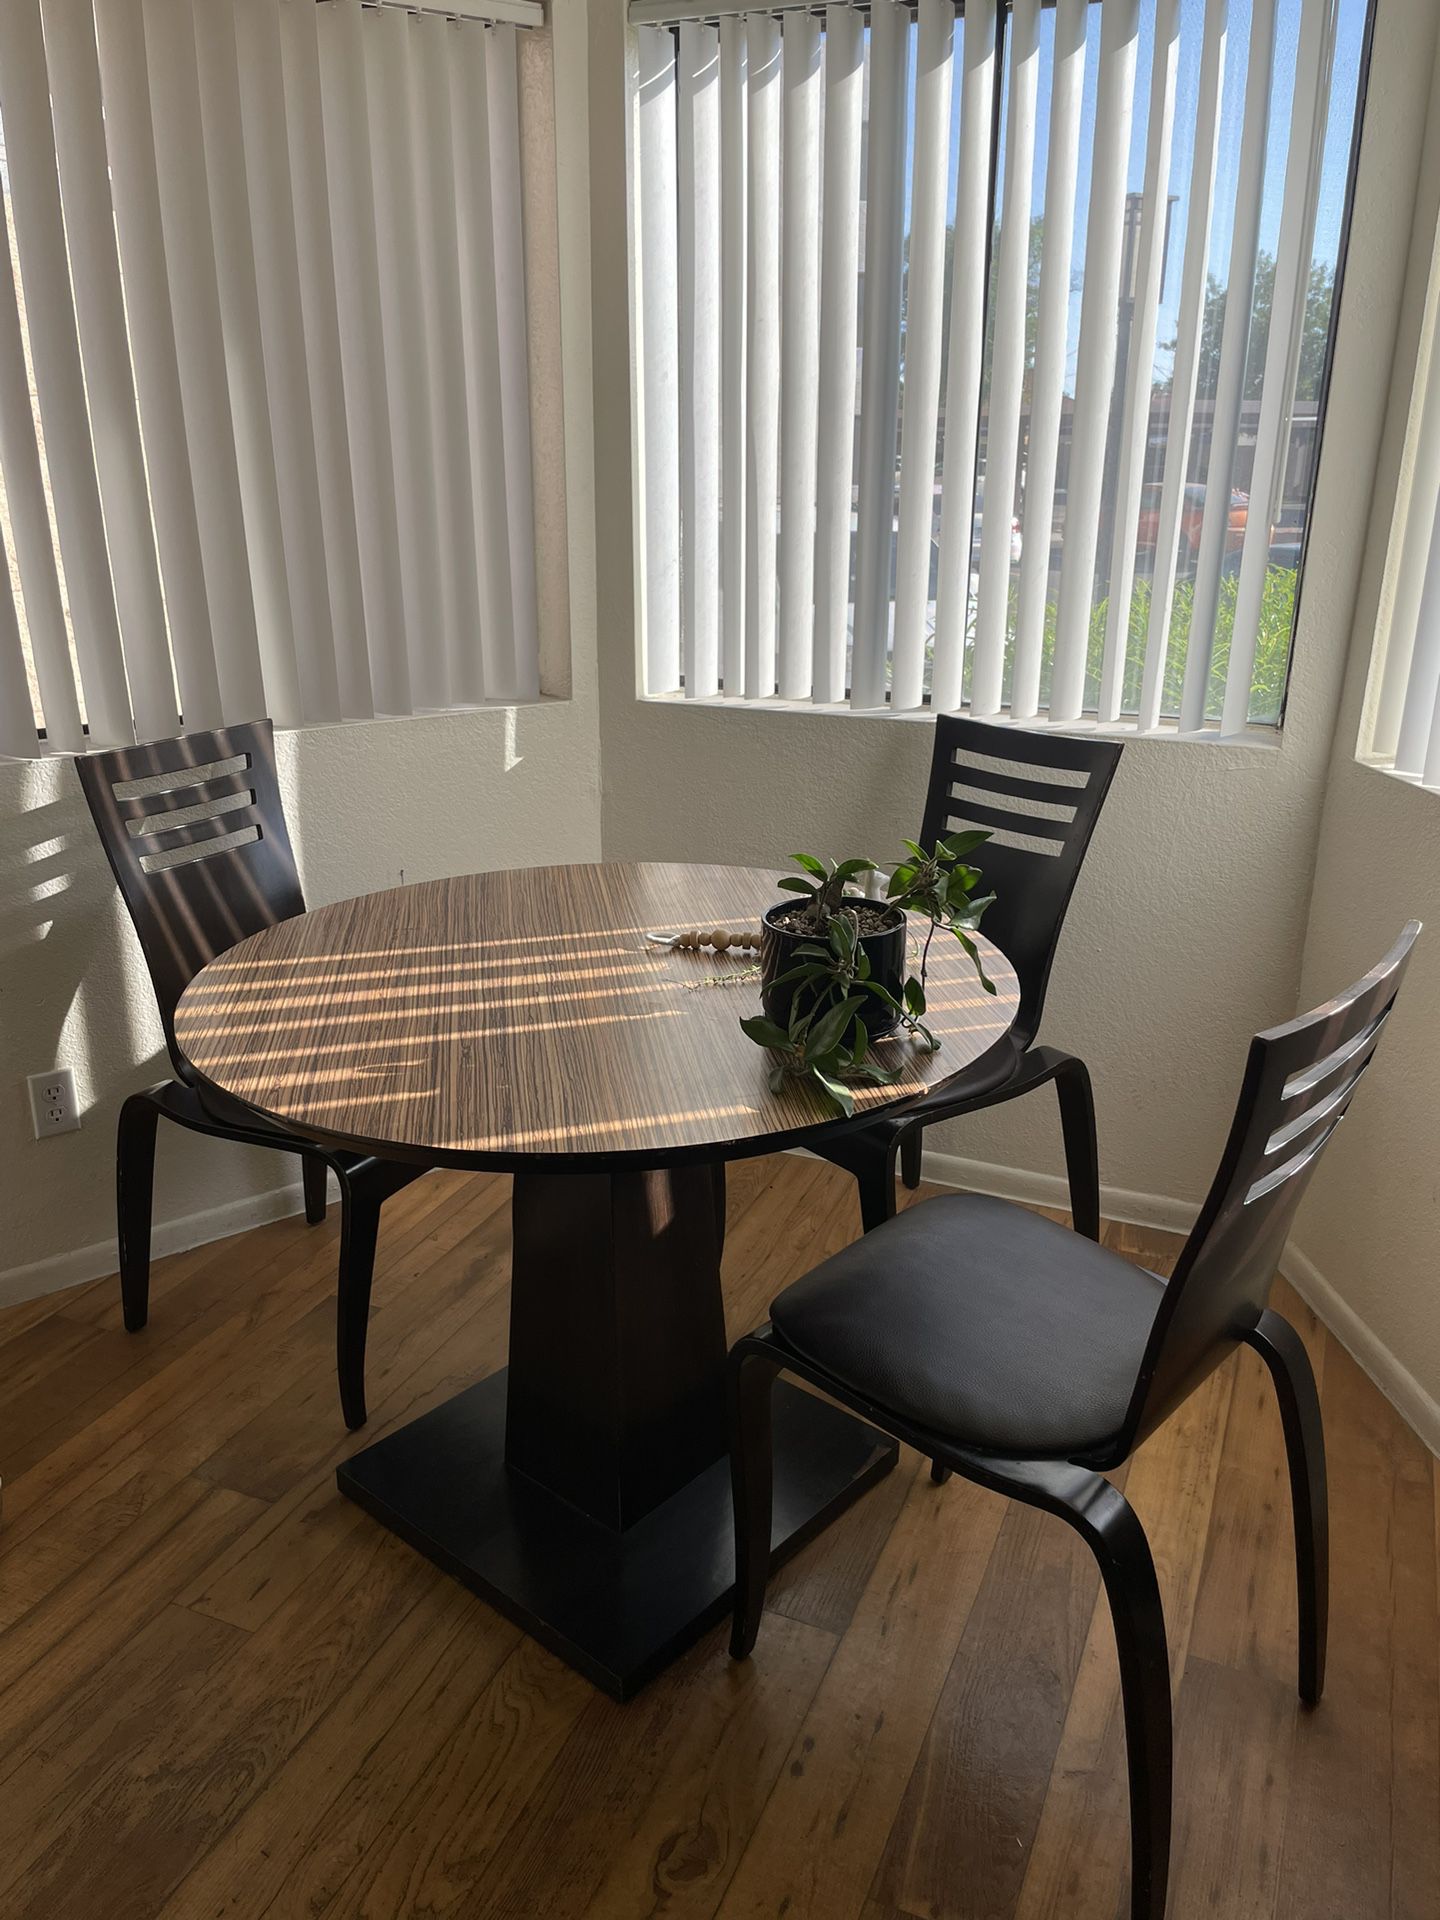 Dining Table and Chairs Set